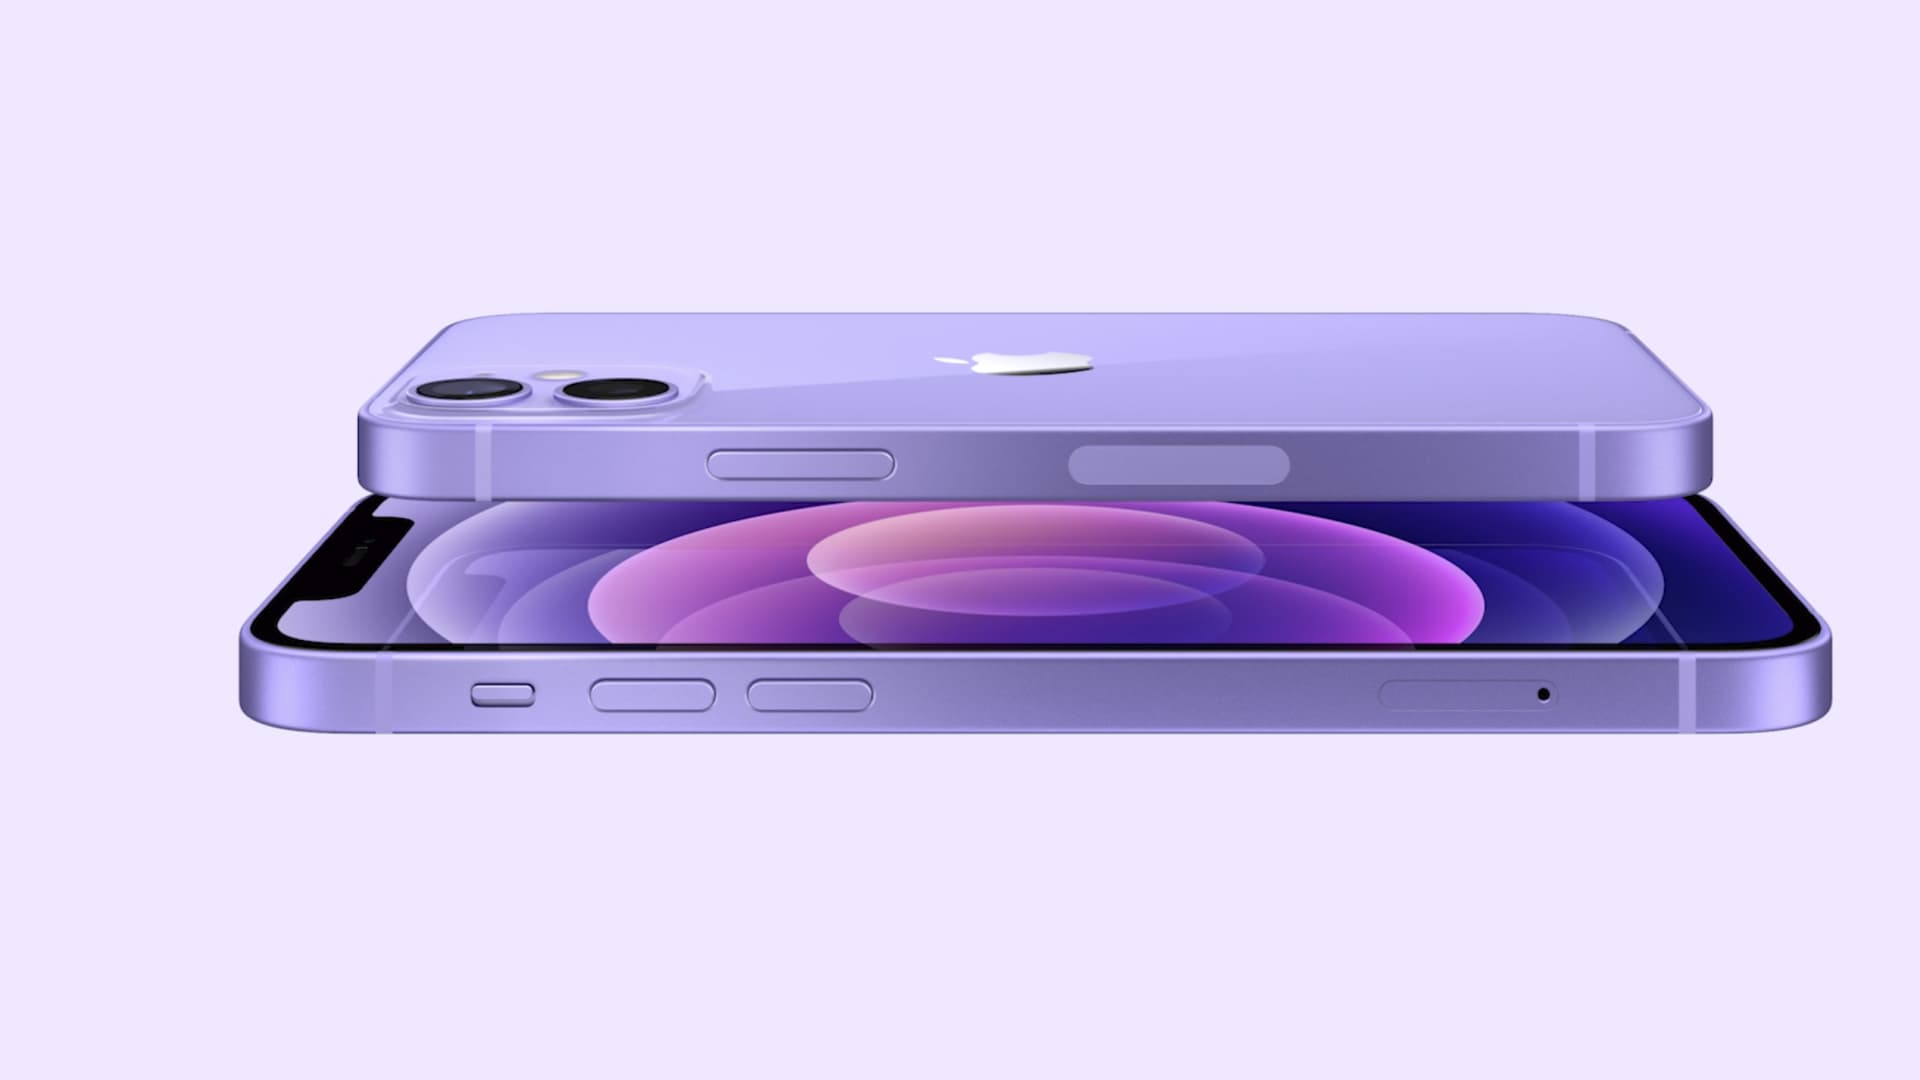 Apple launches a new purple color iPhone for Spring.